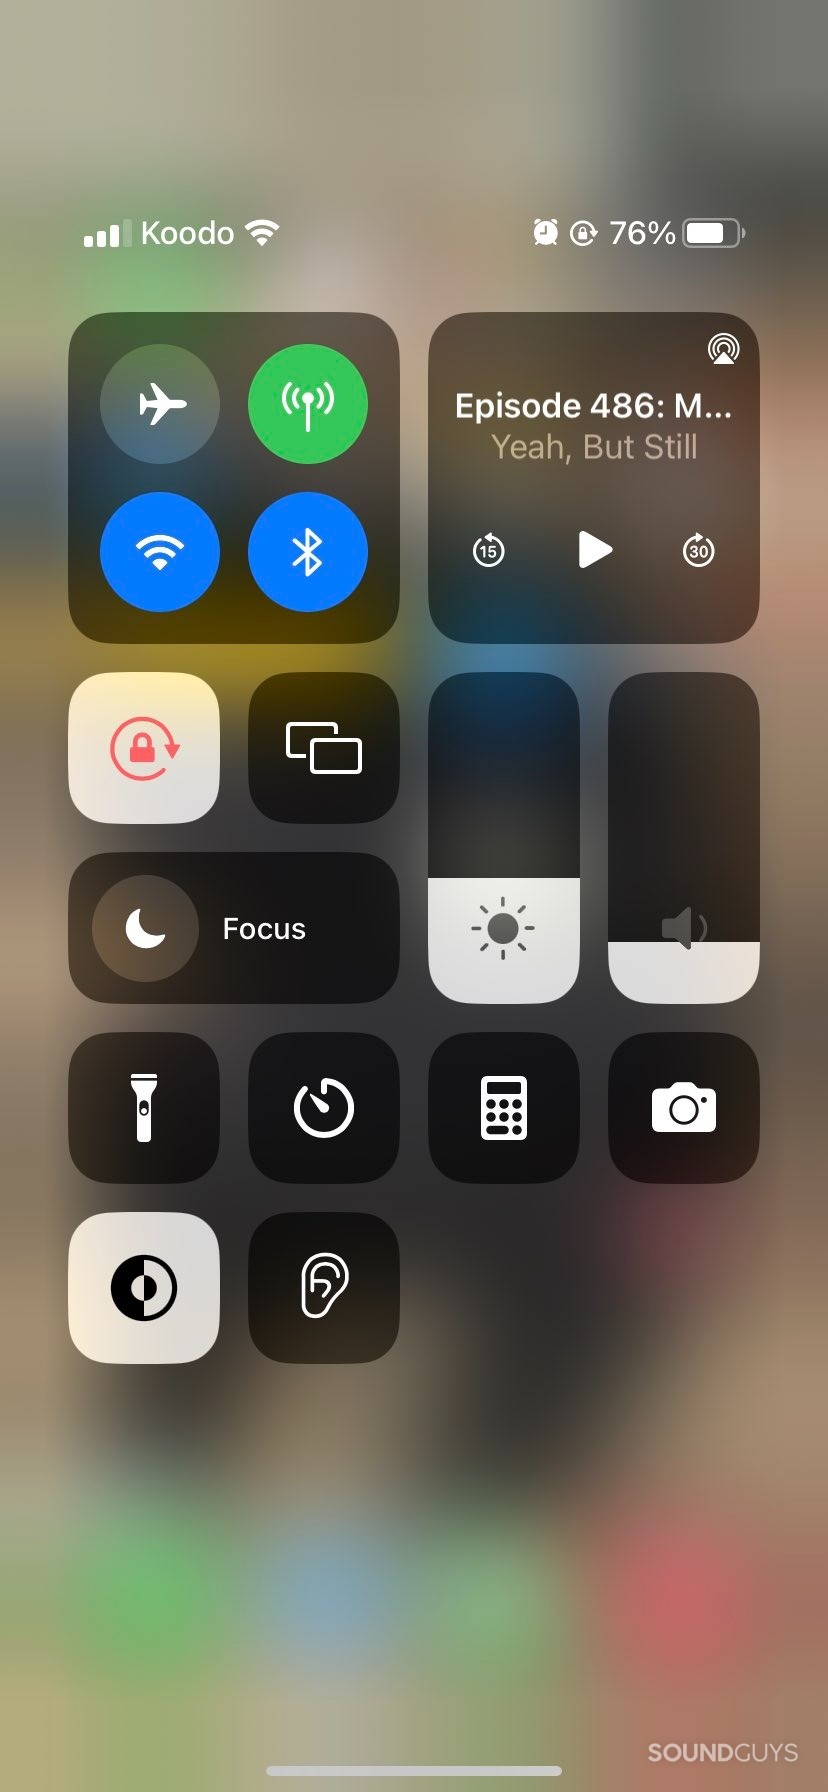 The Control Center on an iPhone, showing an ear icon for hearing accessibility settings.